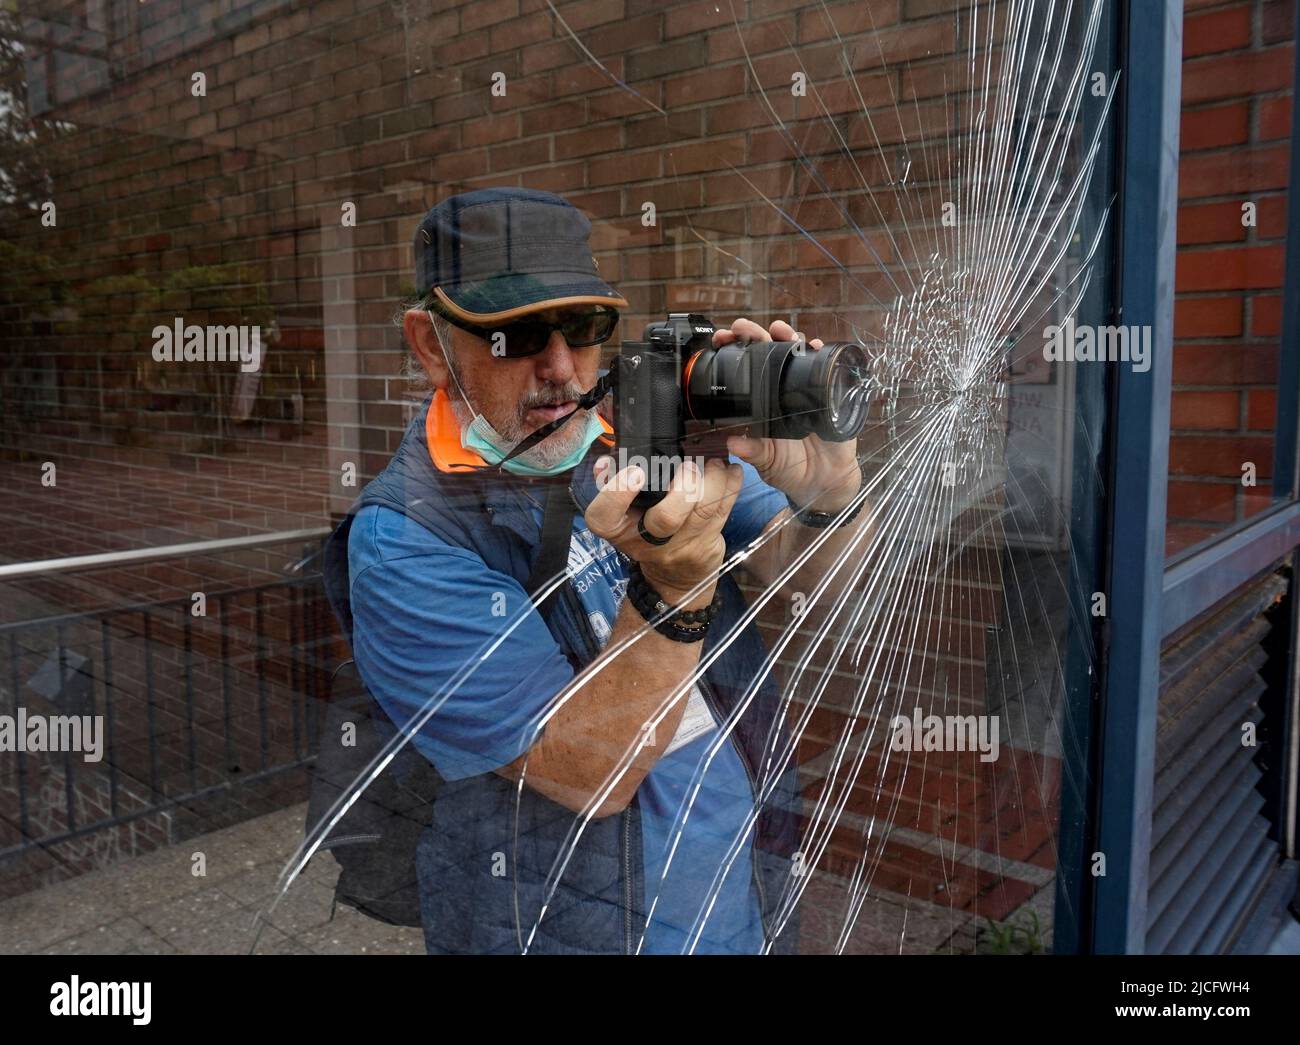 Leverkusen, Germany - Aug 17 2020 A photographer makes a photo from a damaged window. Clear case of vandalism. He uses a Sony alpha 7 mirror-less digi Stock Photo